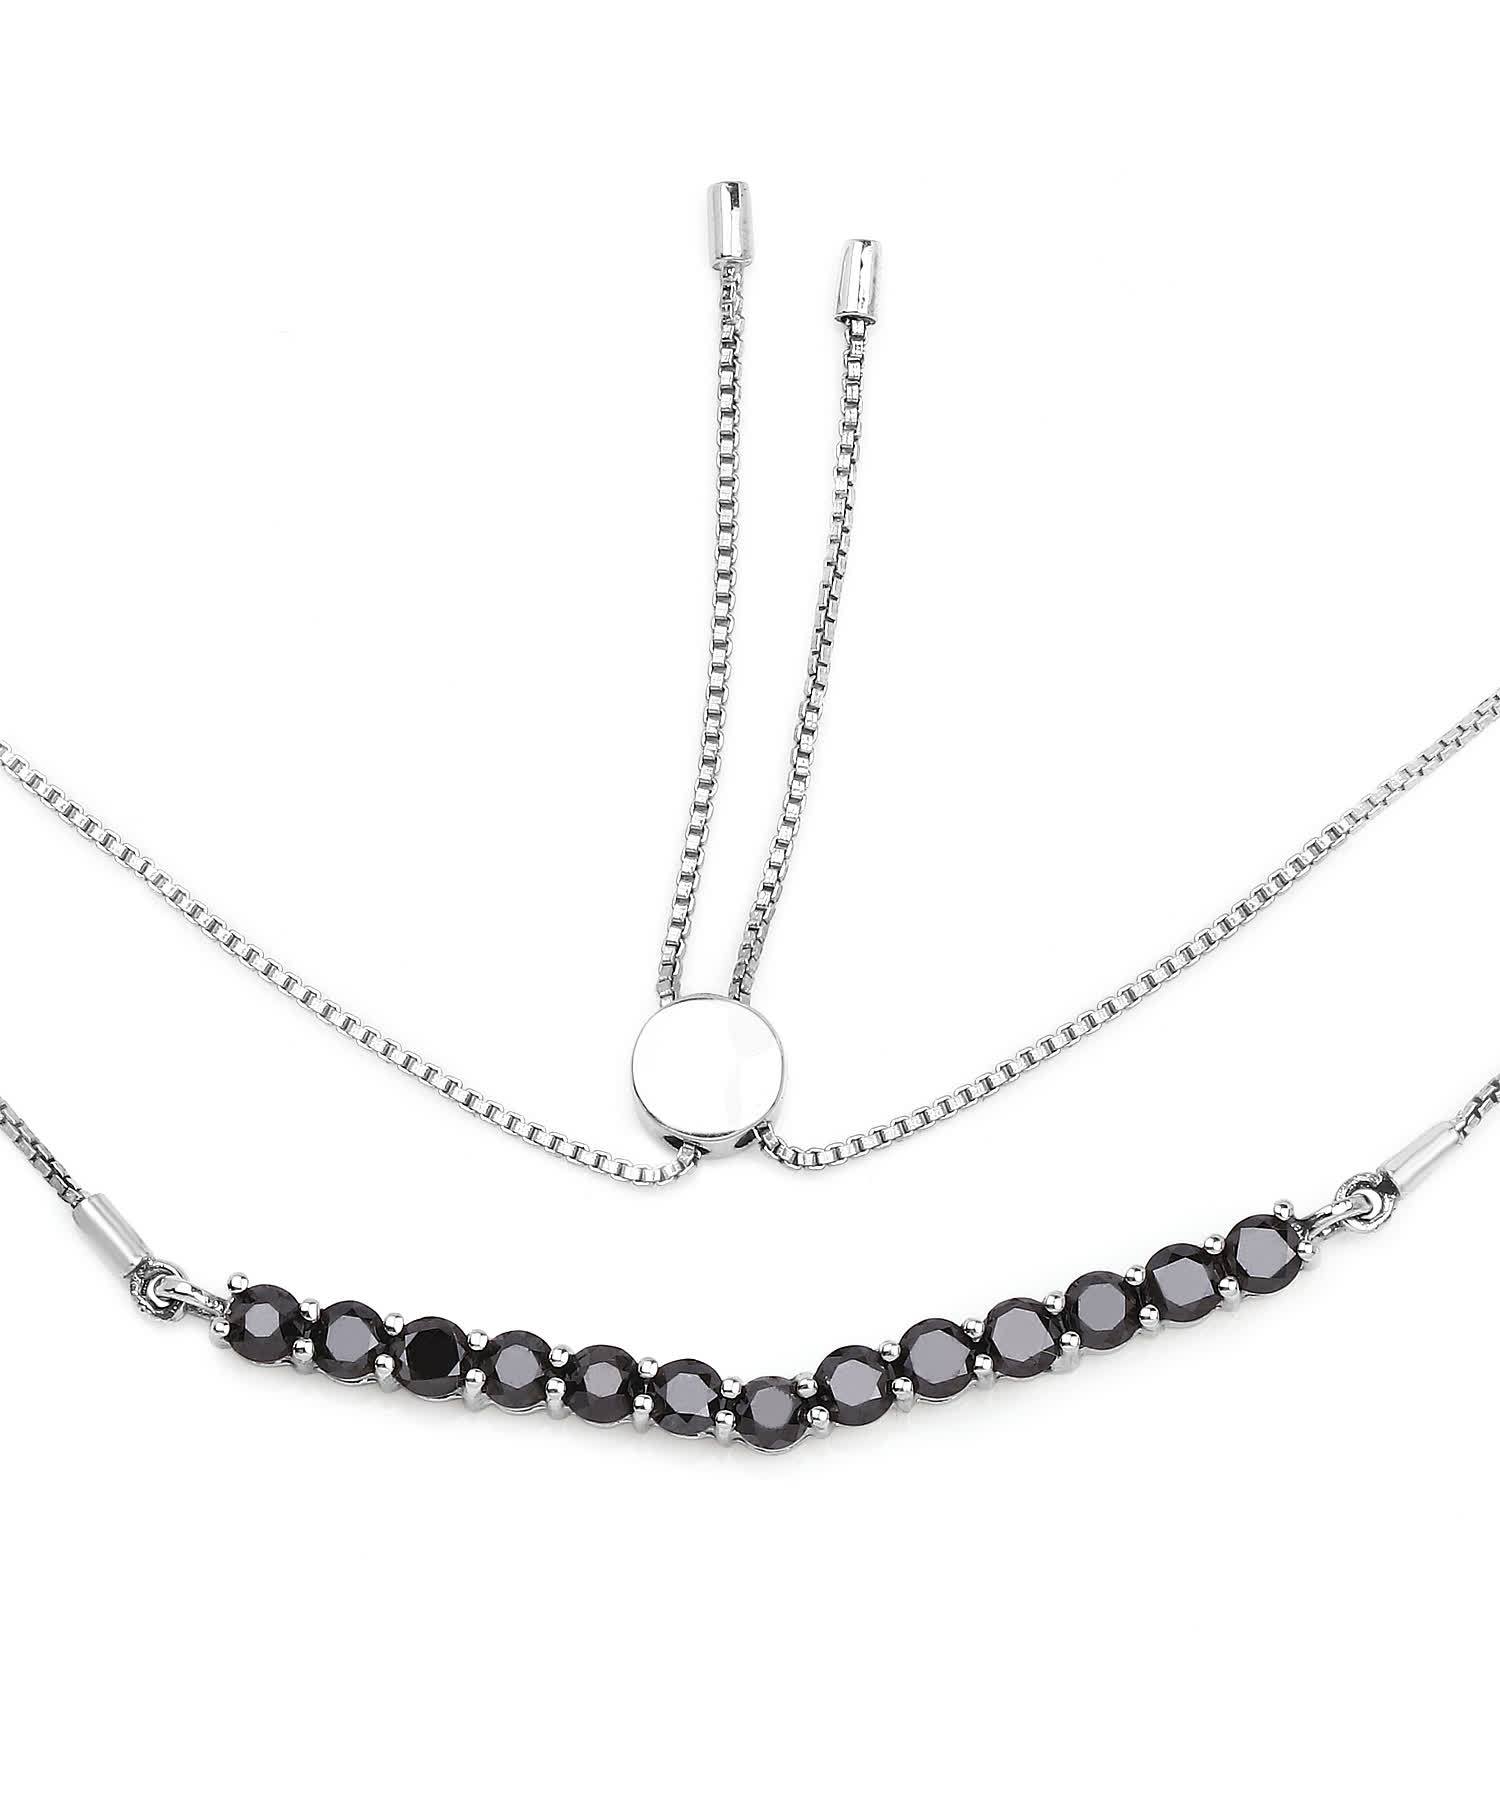 2.28ctw Black Diamond Rhodium Plated 925 Sterling Silver Necklace View 1